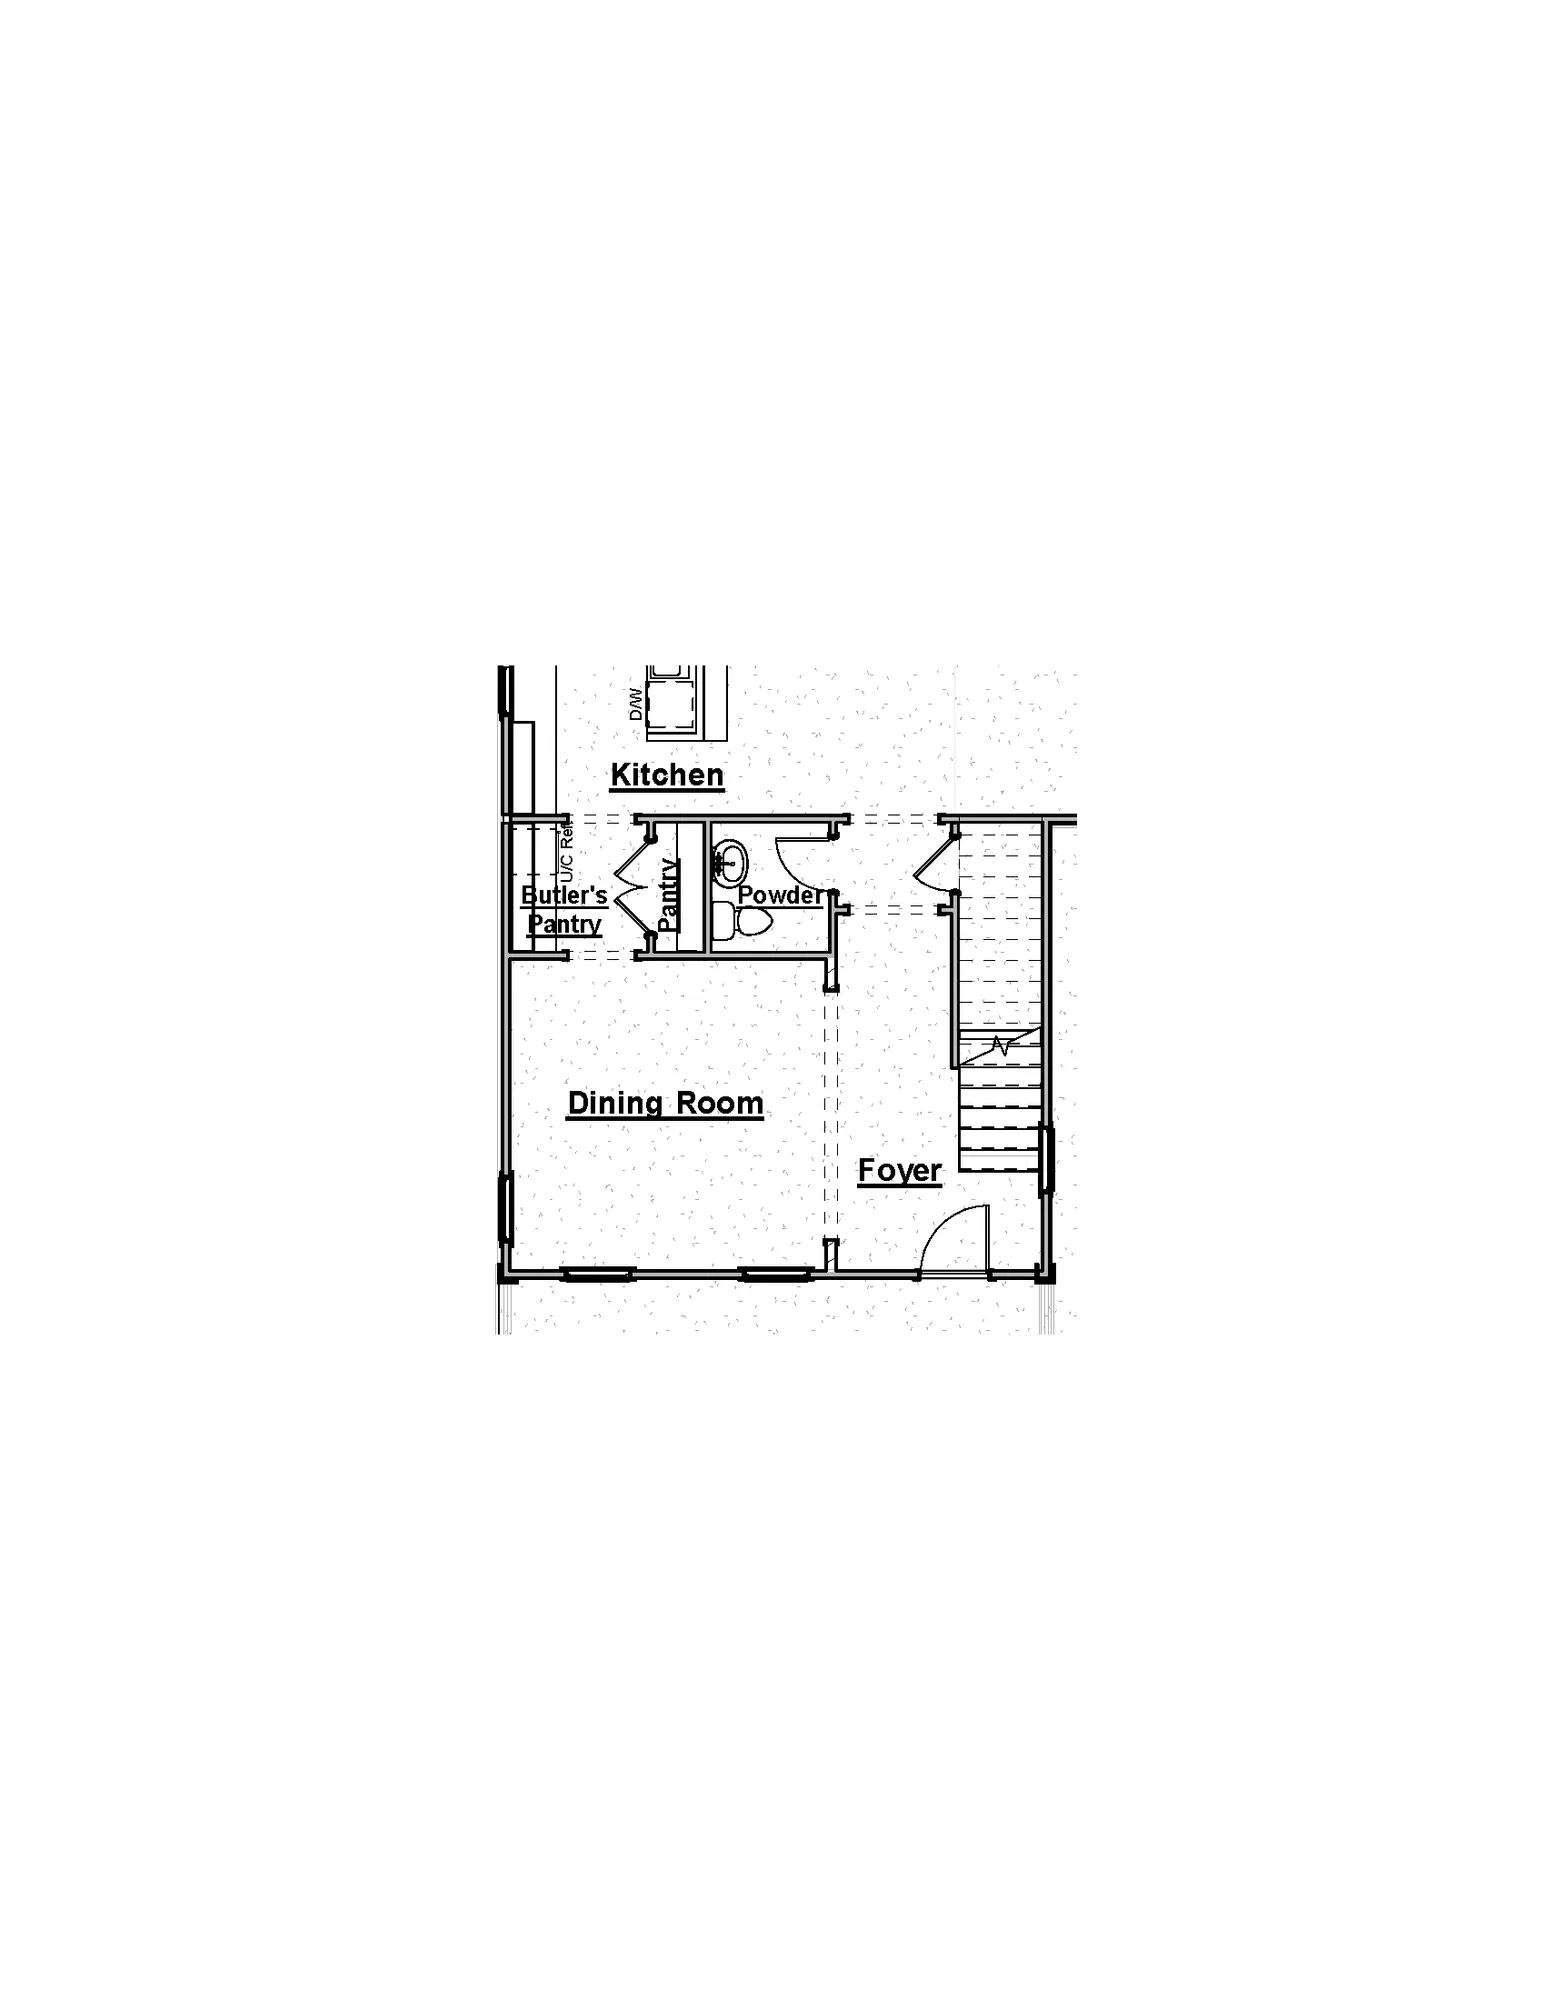 Butler's Pantry with Beverage Cooler Option - undefined